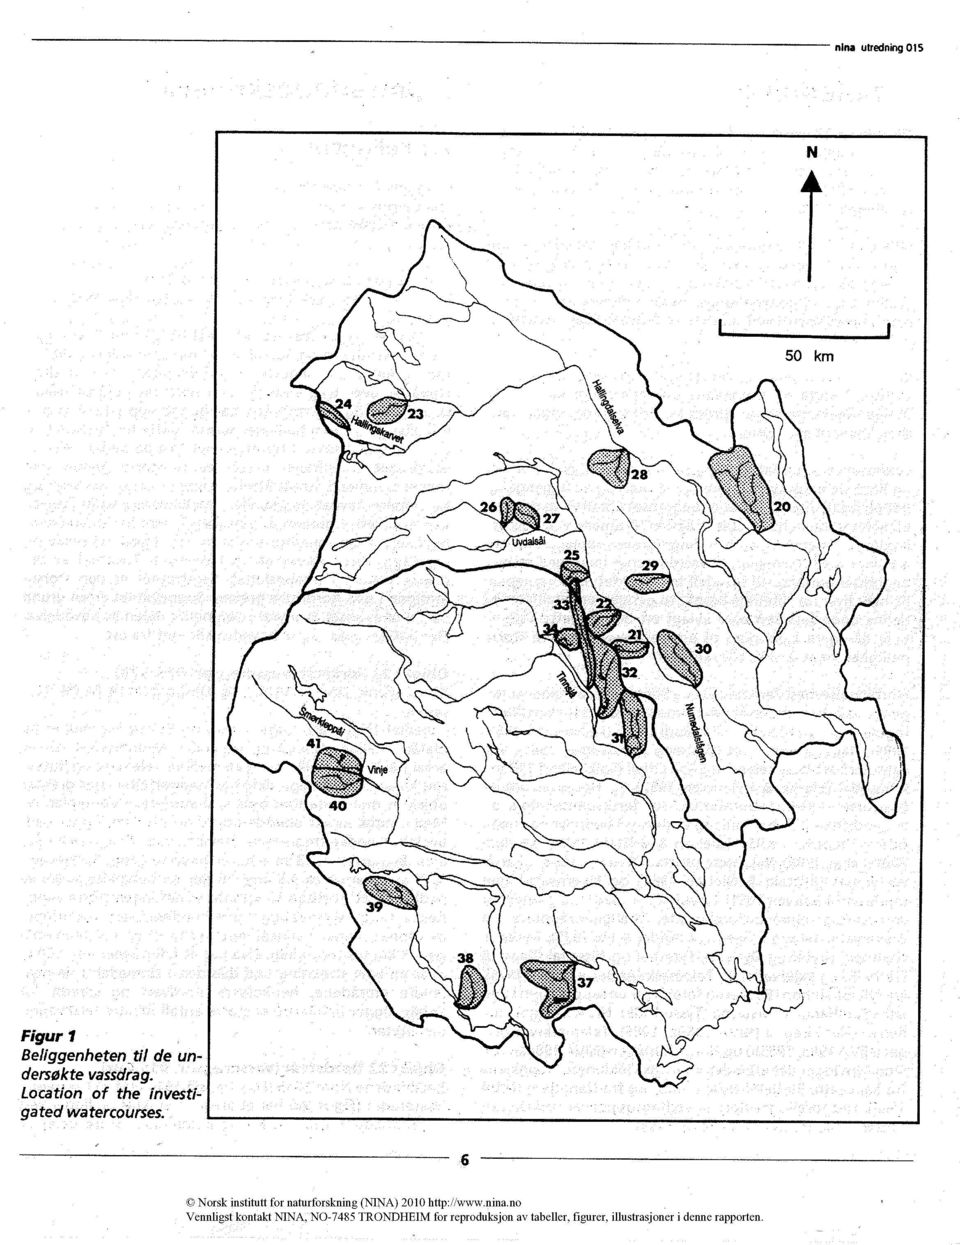 Location of the investigated watercourses.